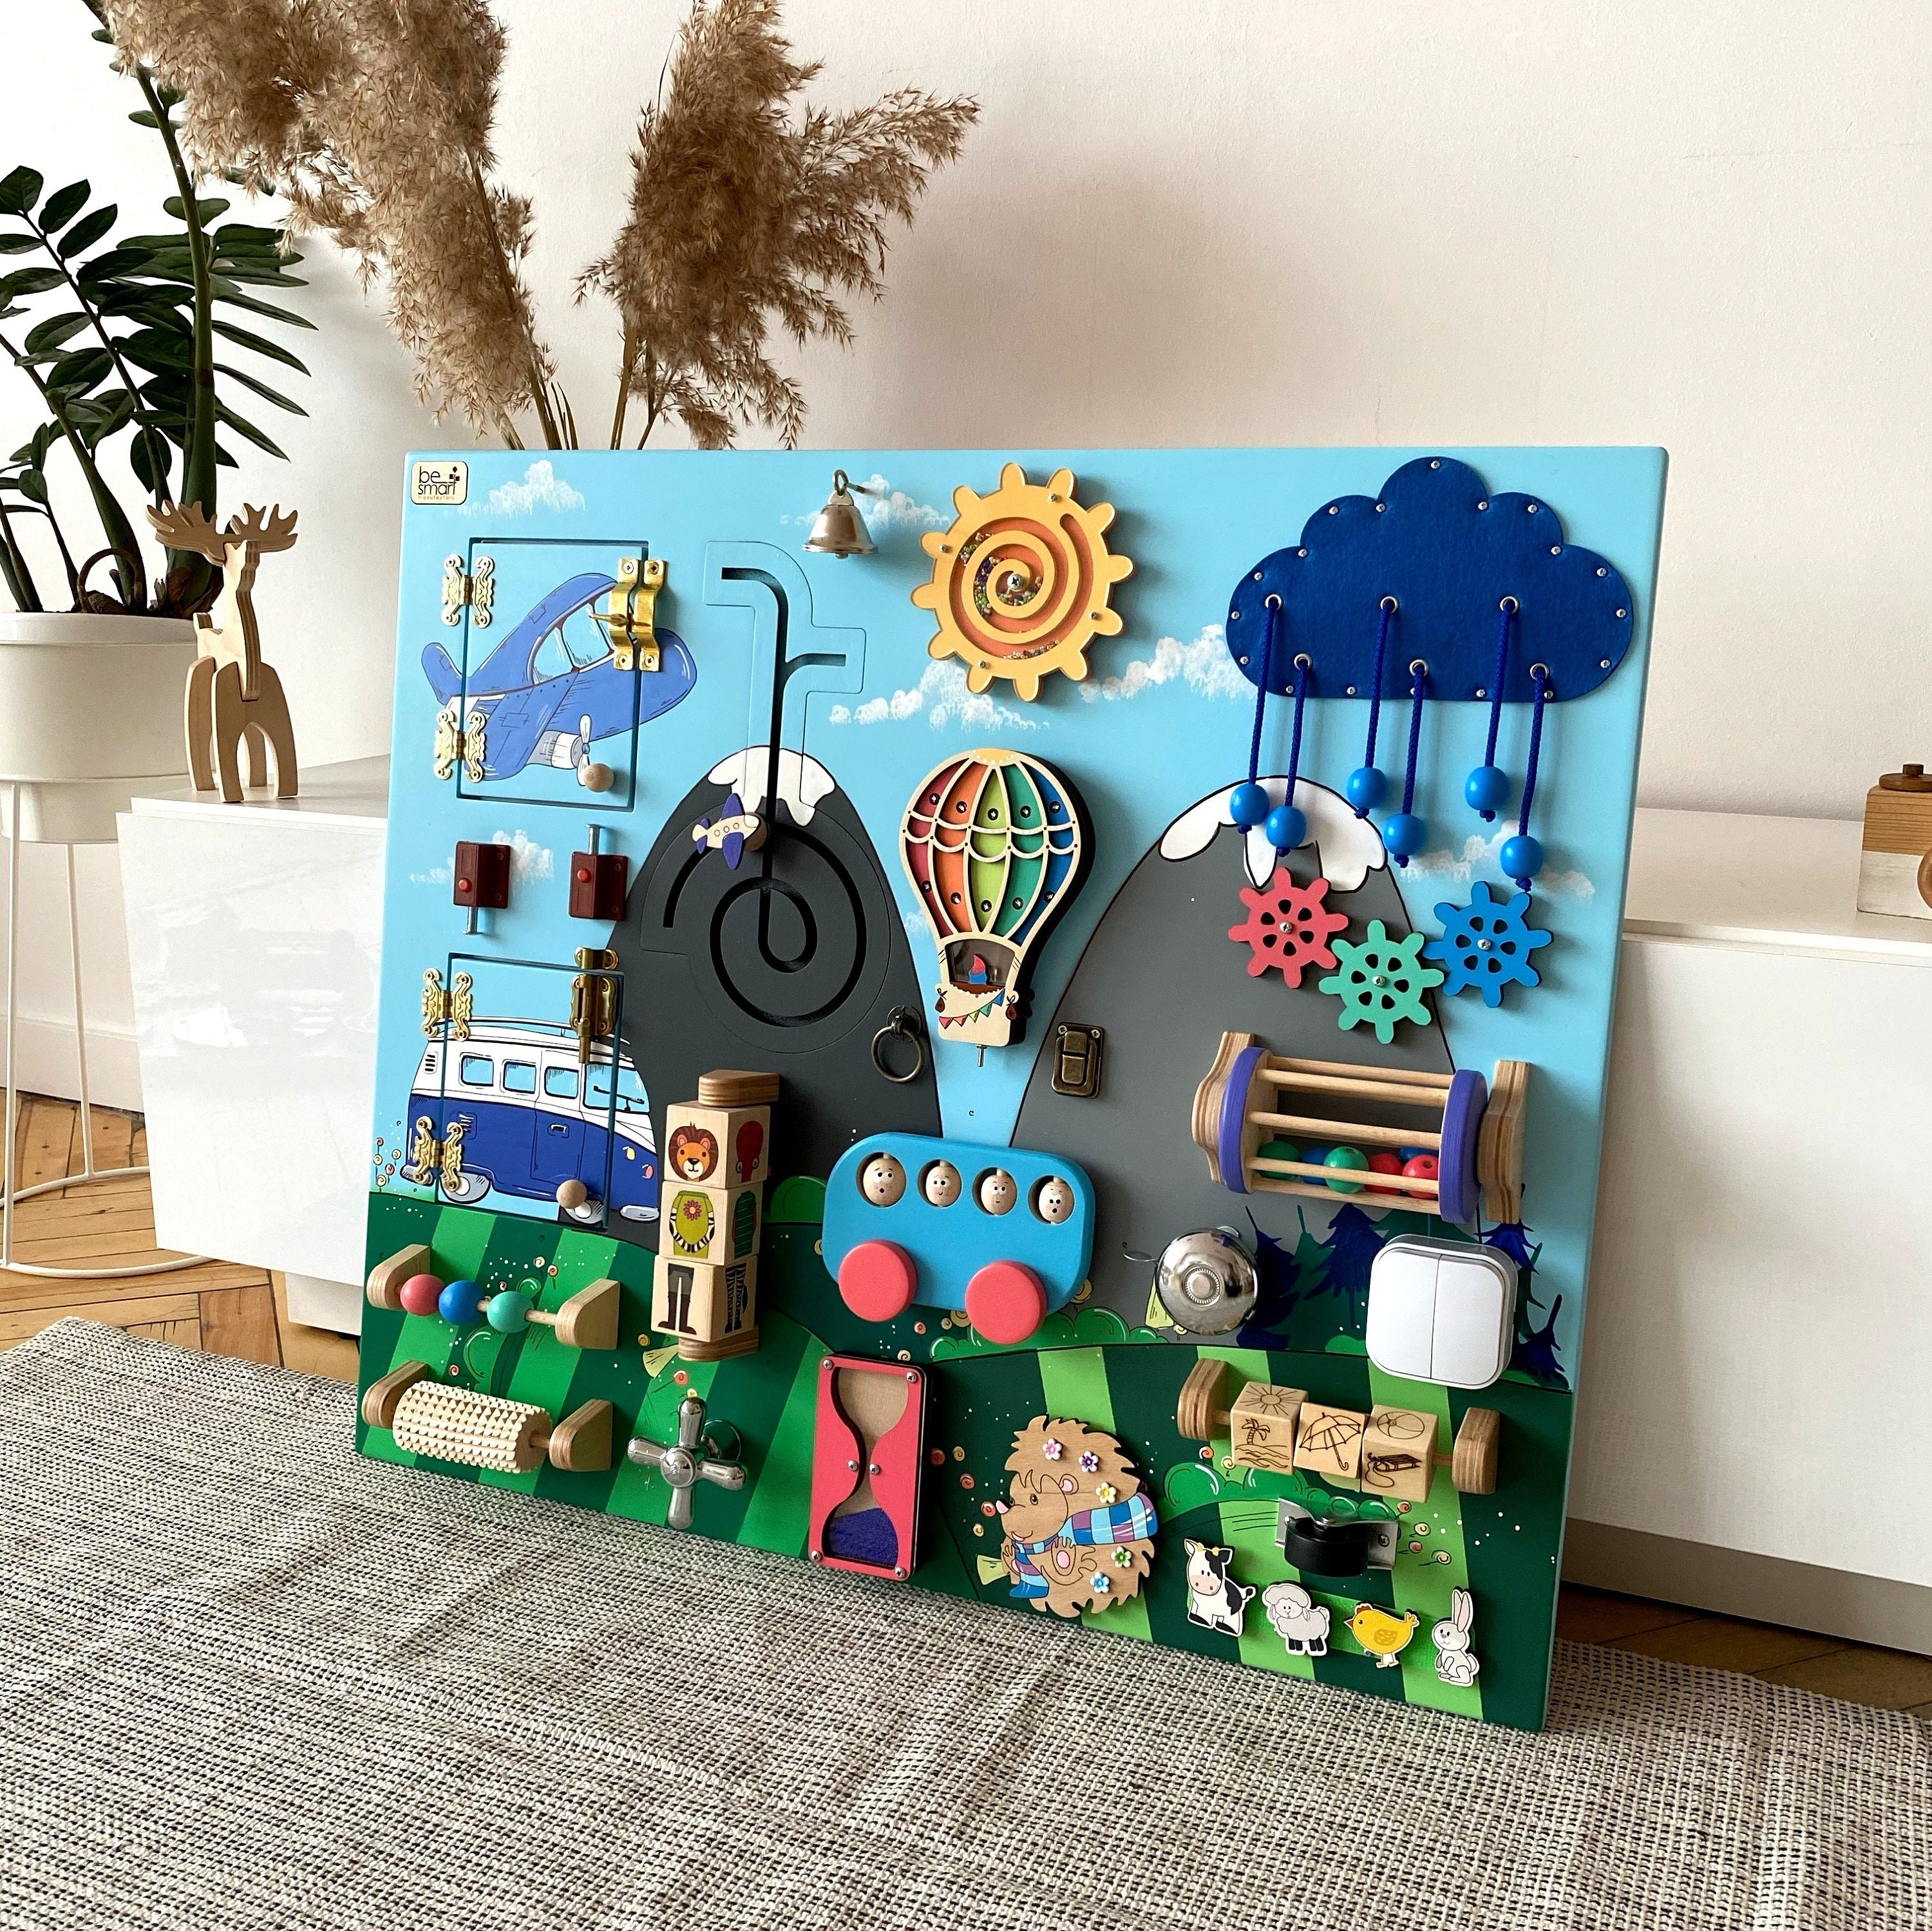 Toddler Busy Board: Peek-a-Boo Edition - Busy Toddler